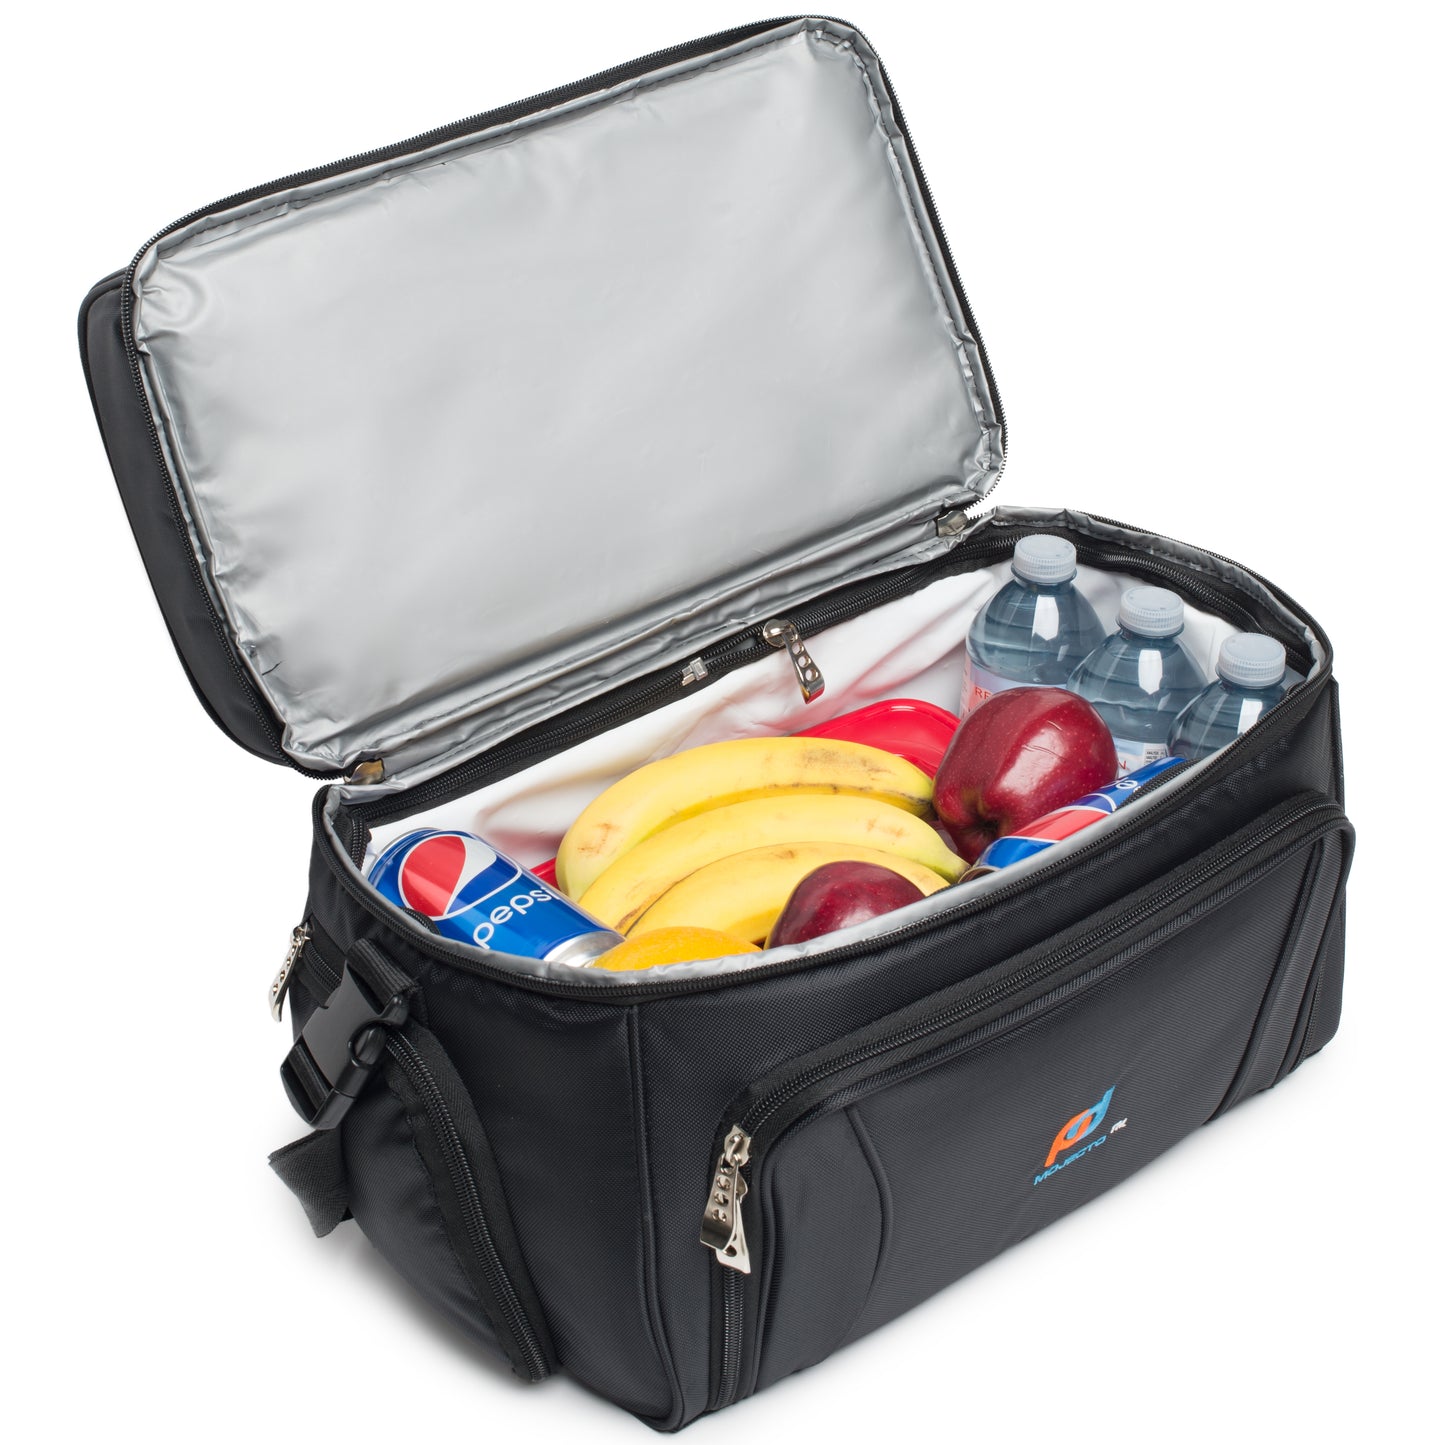 Large Cooler Bag Plus 5-Pack Ice Pack.